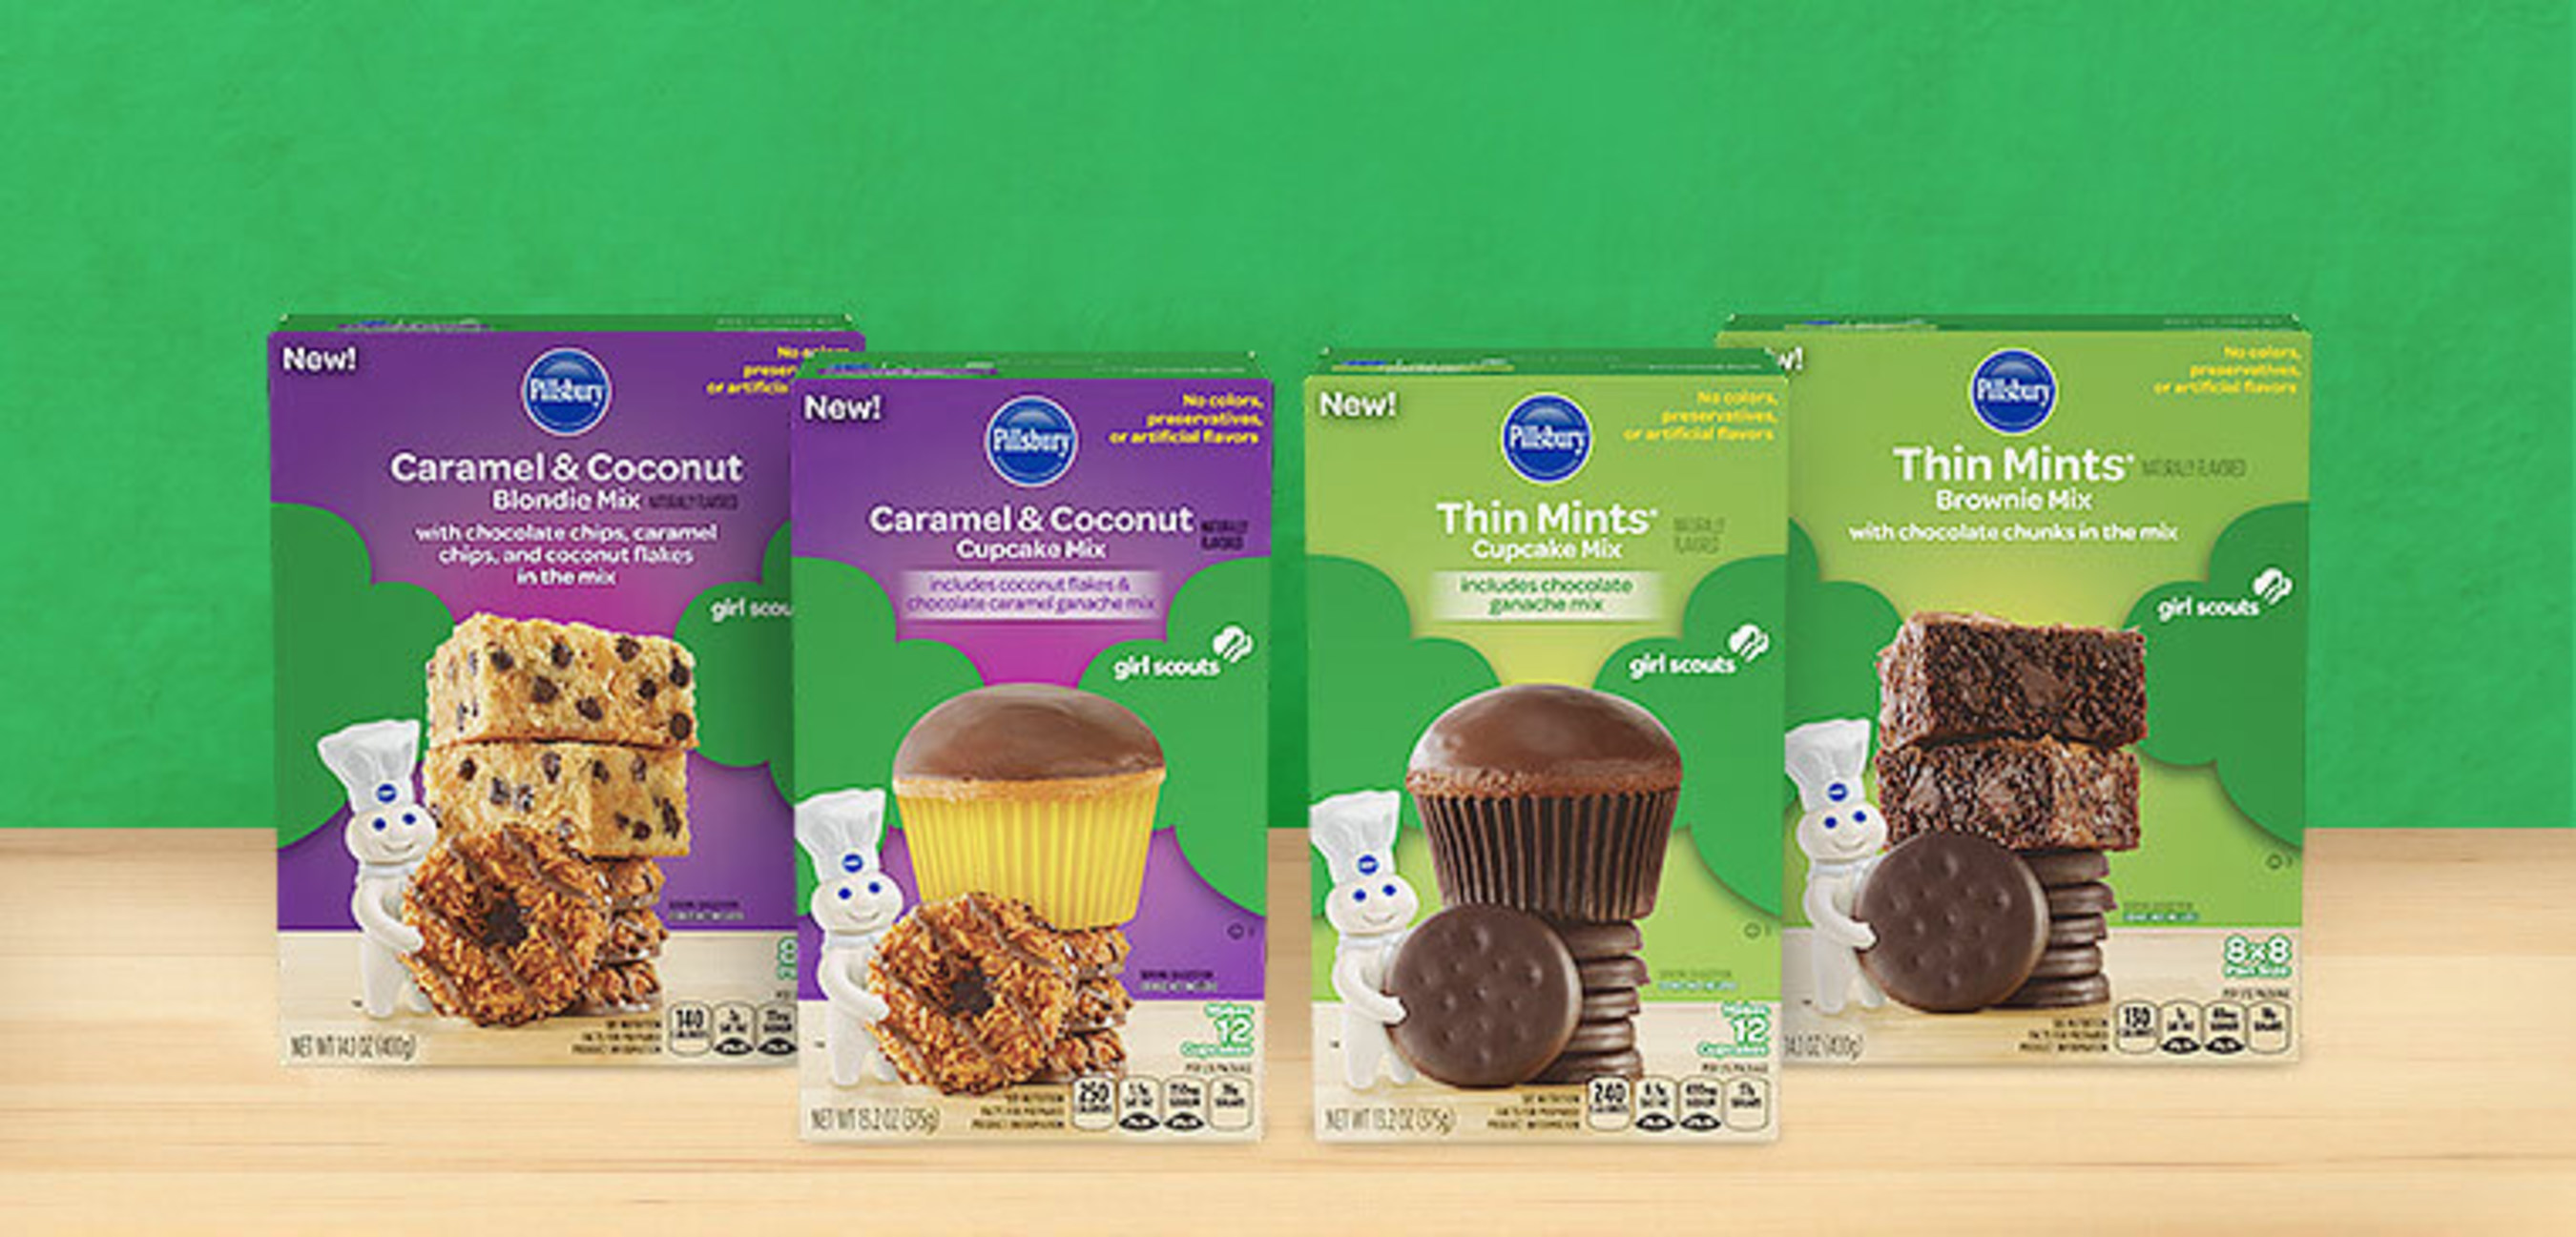 NEW Pillsbury(TM) Girl Scouts(R) Thin Mints(R) and Caramel & Coconut Flavored Baking Mixes